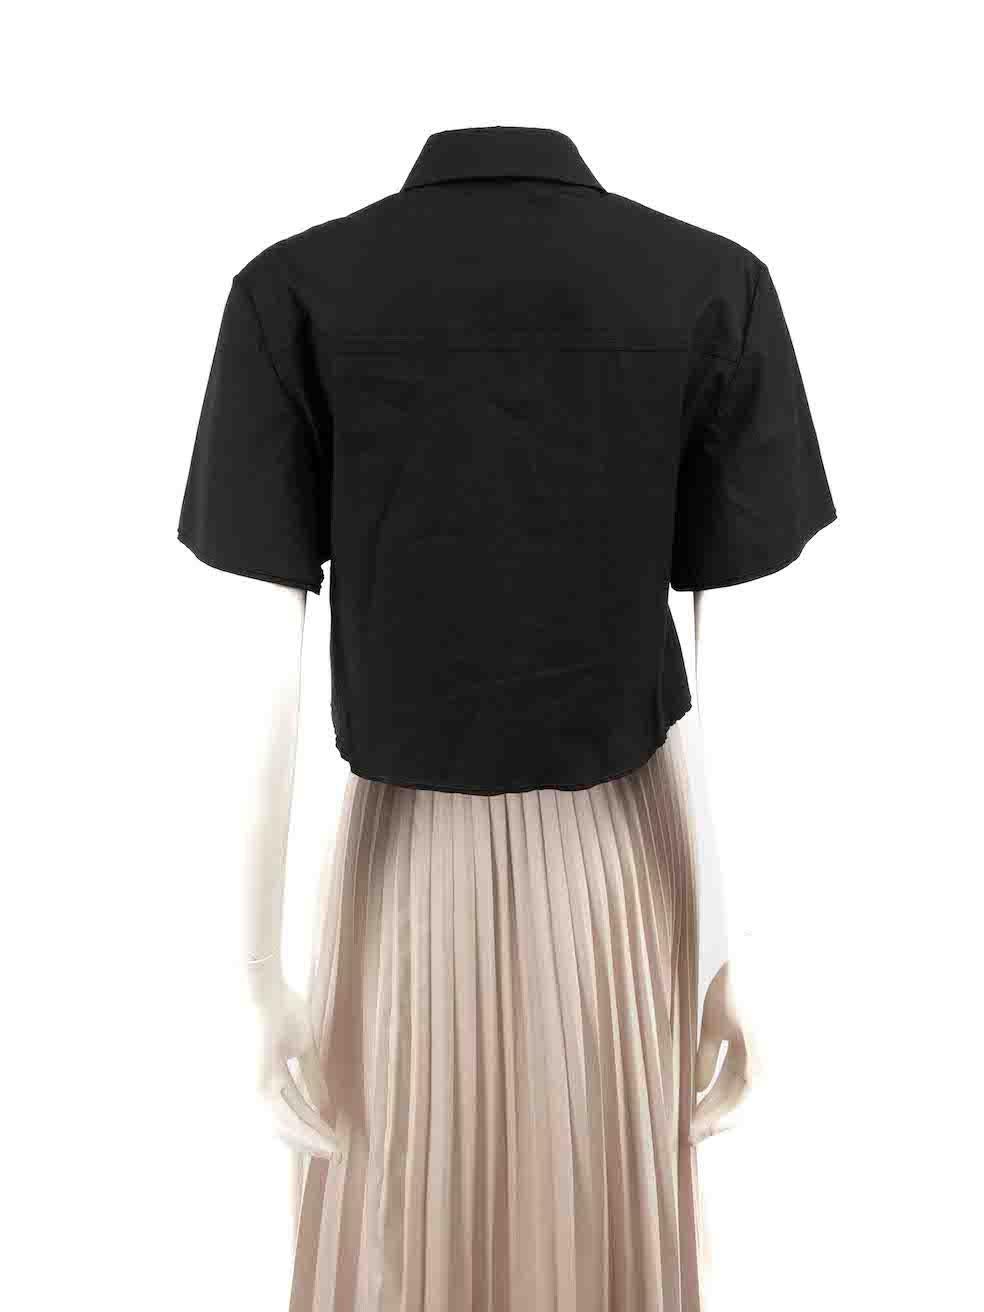 Proenza Schouler Black Eco Poplin Cropped Shirt Size S In Excellent Condition For Sale In London, GB